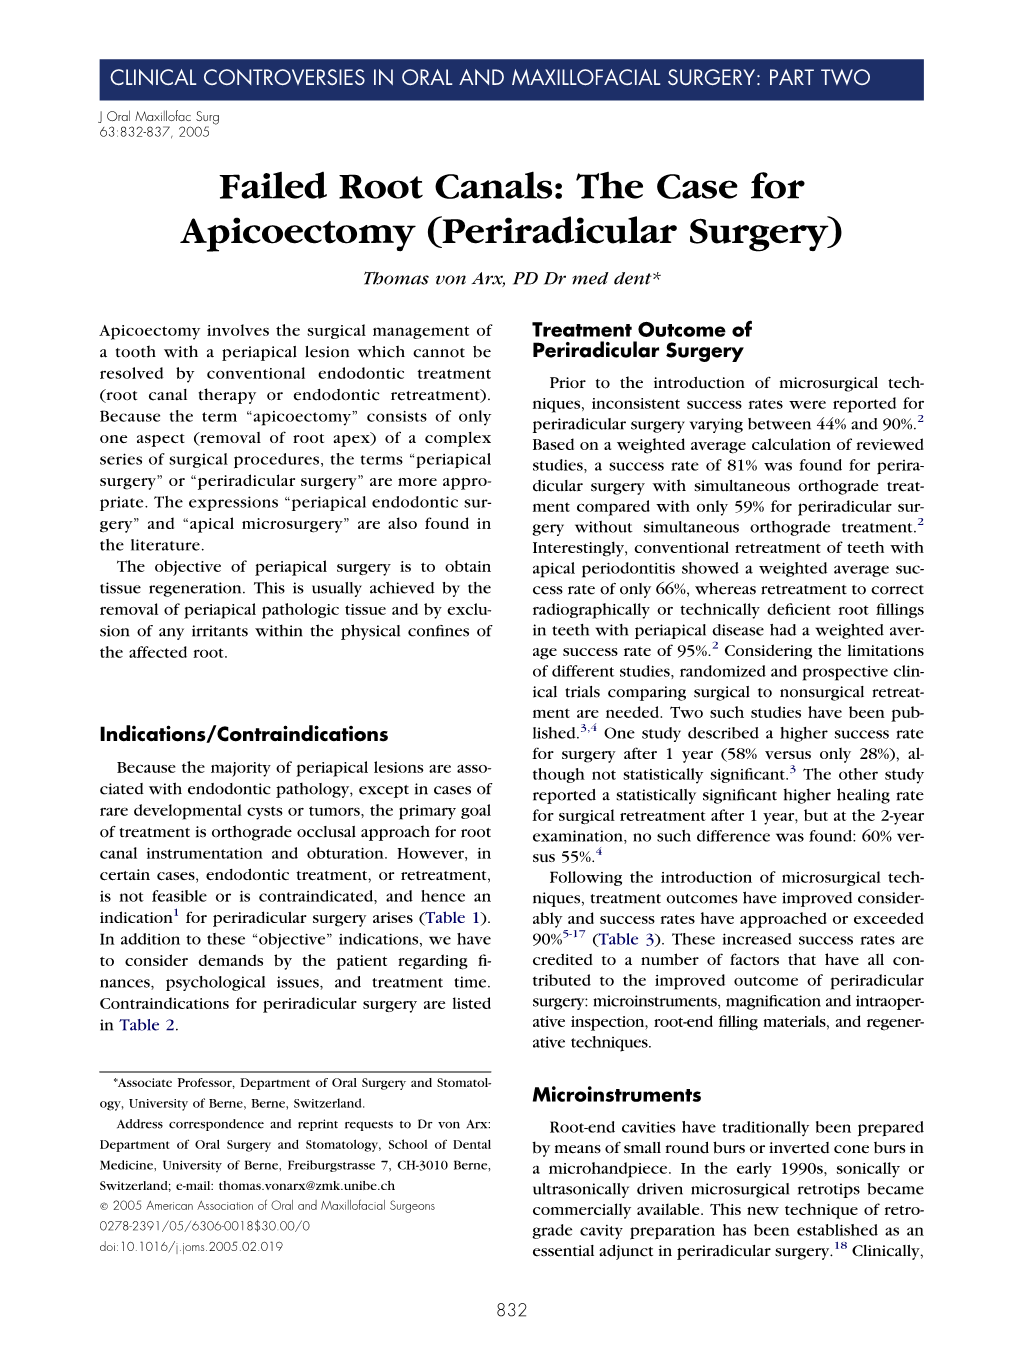 Failed Root Canals: the Case for Apicoectomy (Periradicular Surgery) Thomas Von Arx, PD Dr Med Dent*